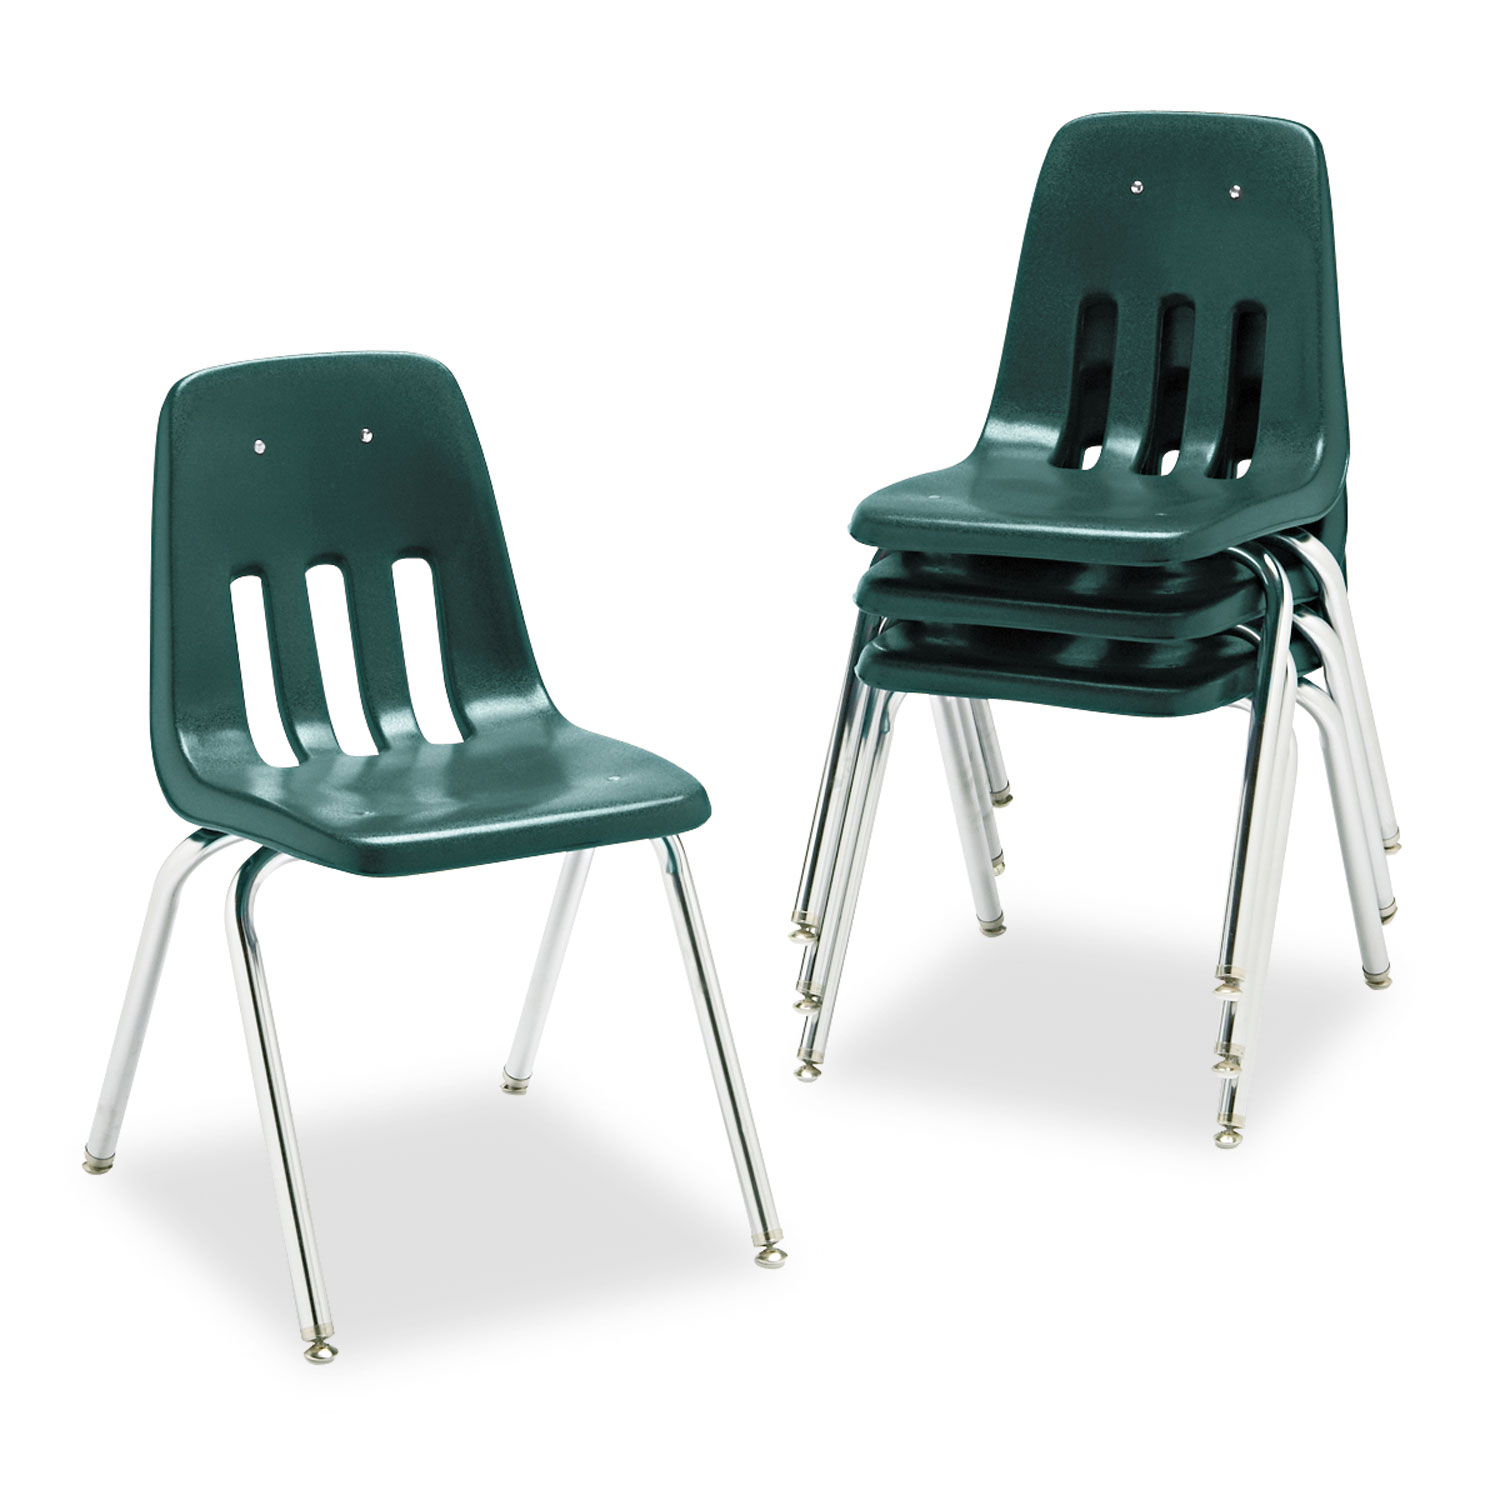 9000 Series Classroom Chair, 18 Seat Height, Forest Green/Chrome, 4/Carton